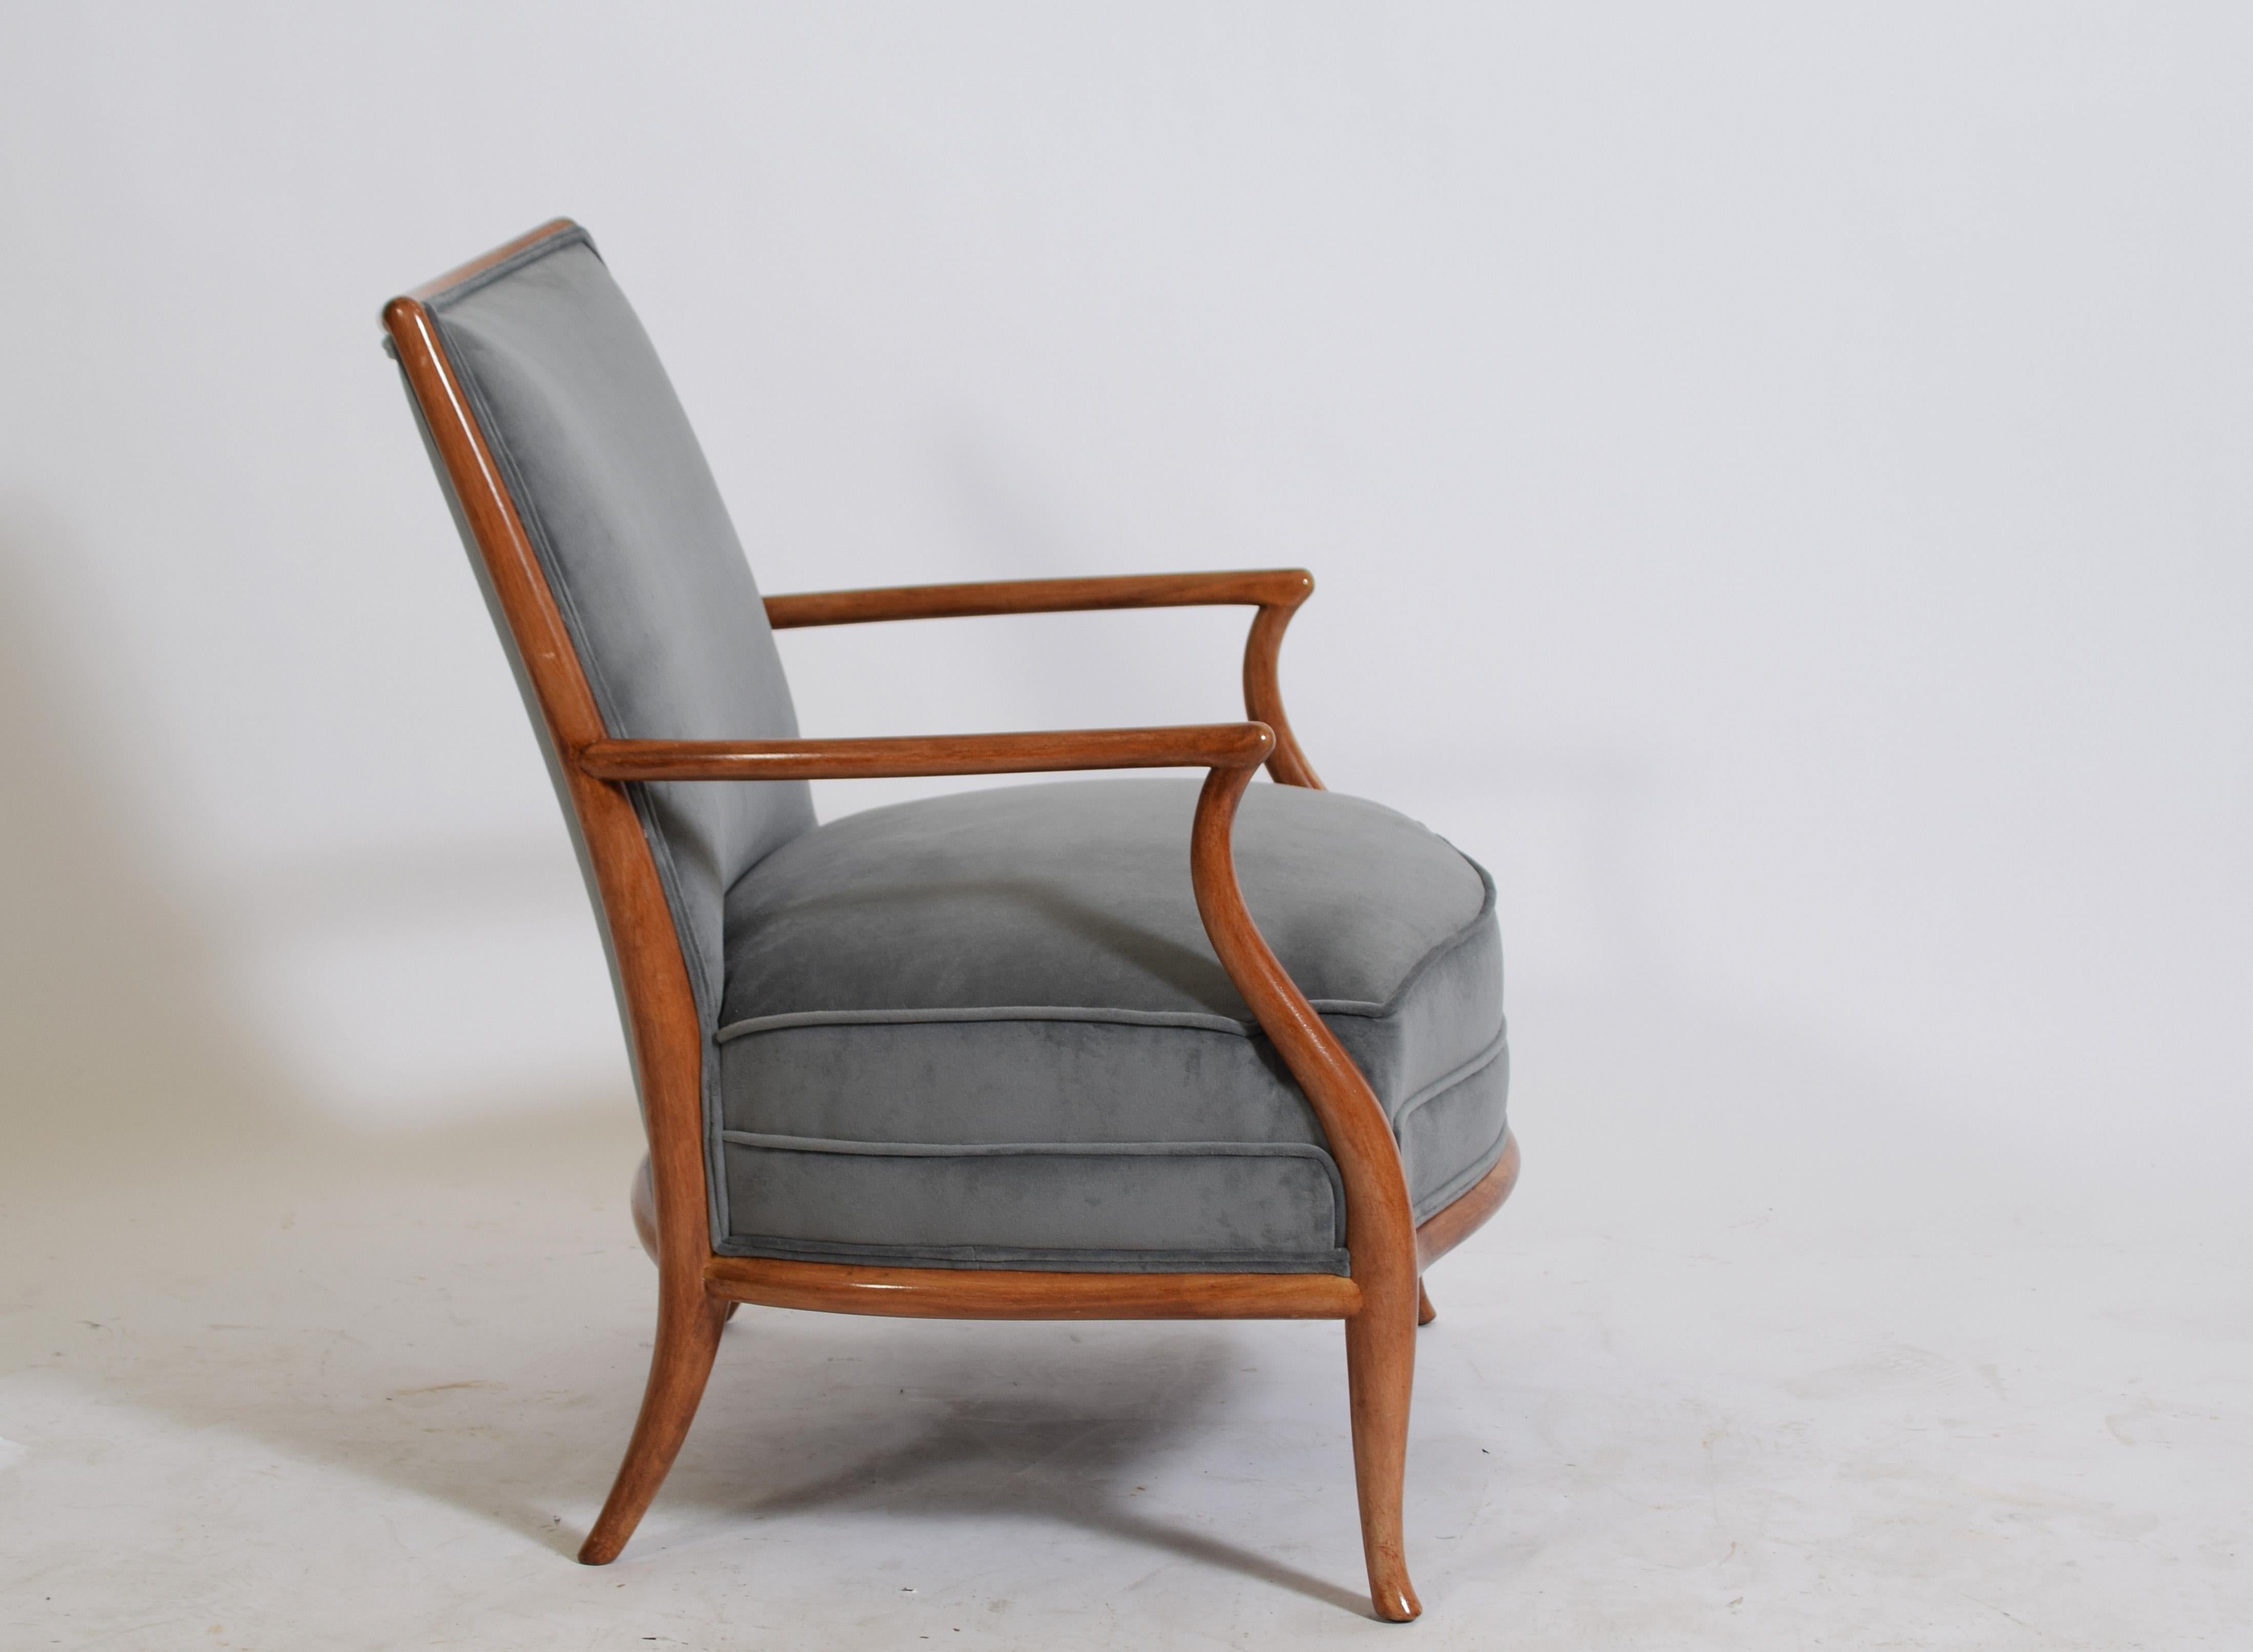 Stylish easy chair design by T.H Robsjohn-Gibbings fo Widdicomb Co.maple frame with new upholstery .Restored